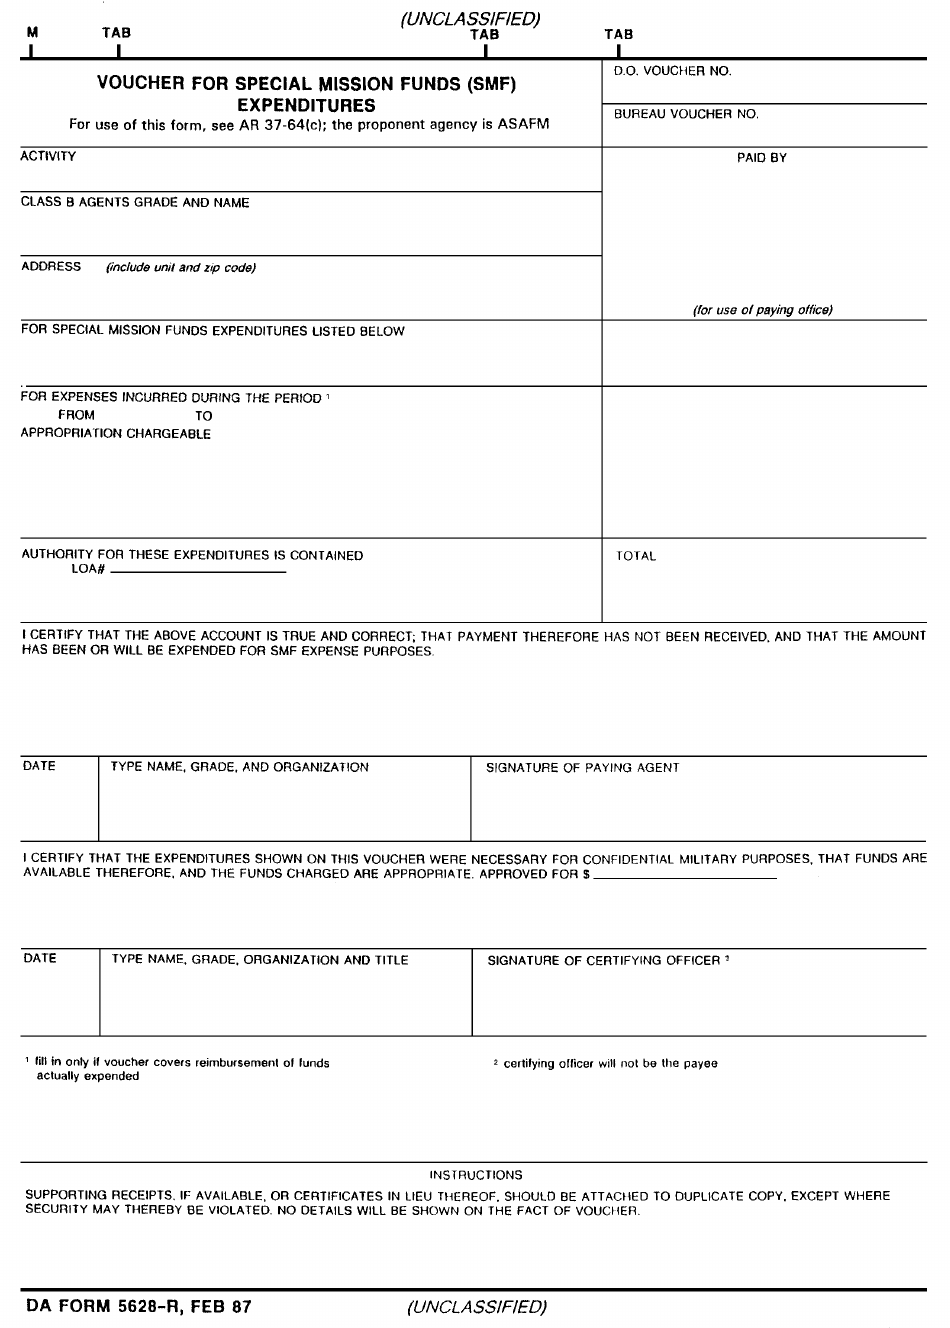 DA Form 5628-R Voucher for Special Mission Funds (Smf) Expenditures, Page 1